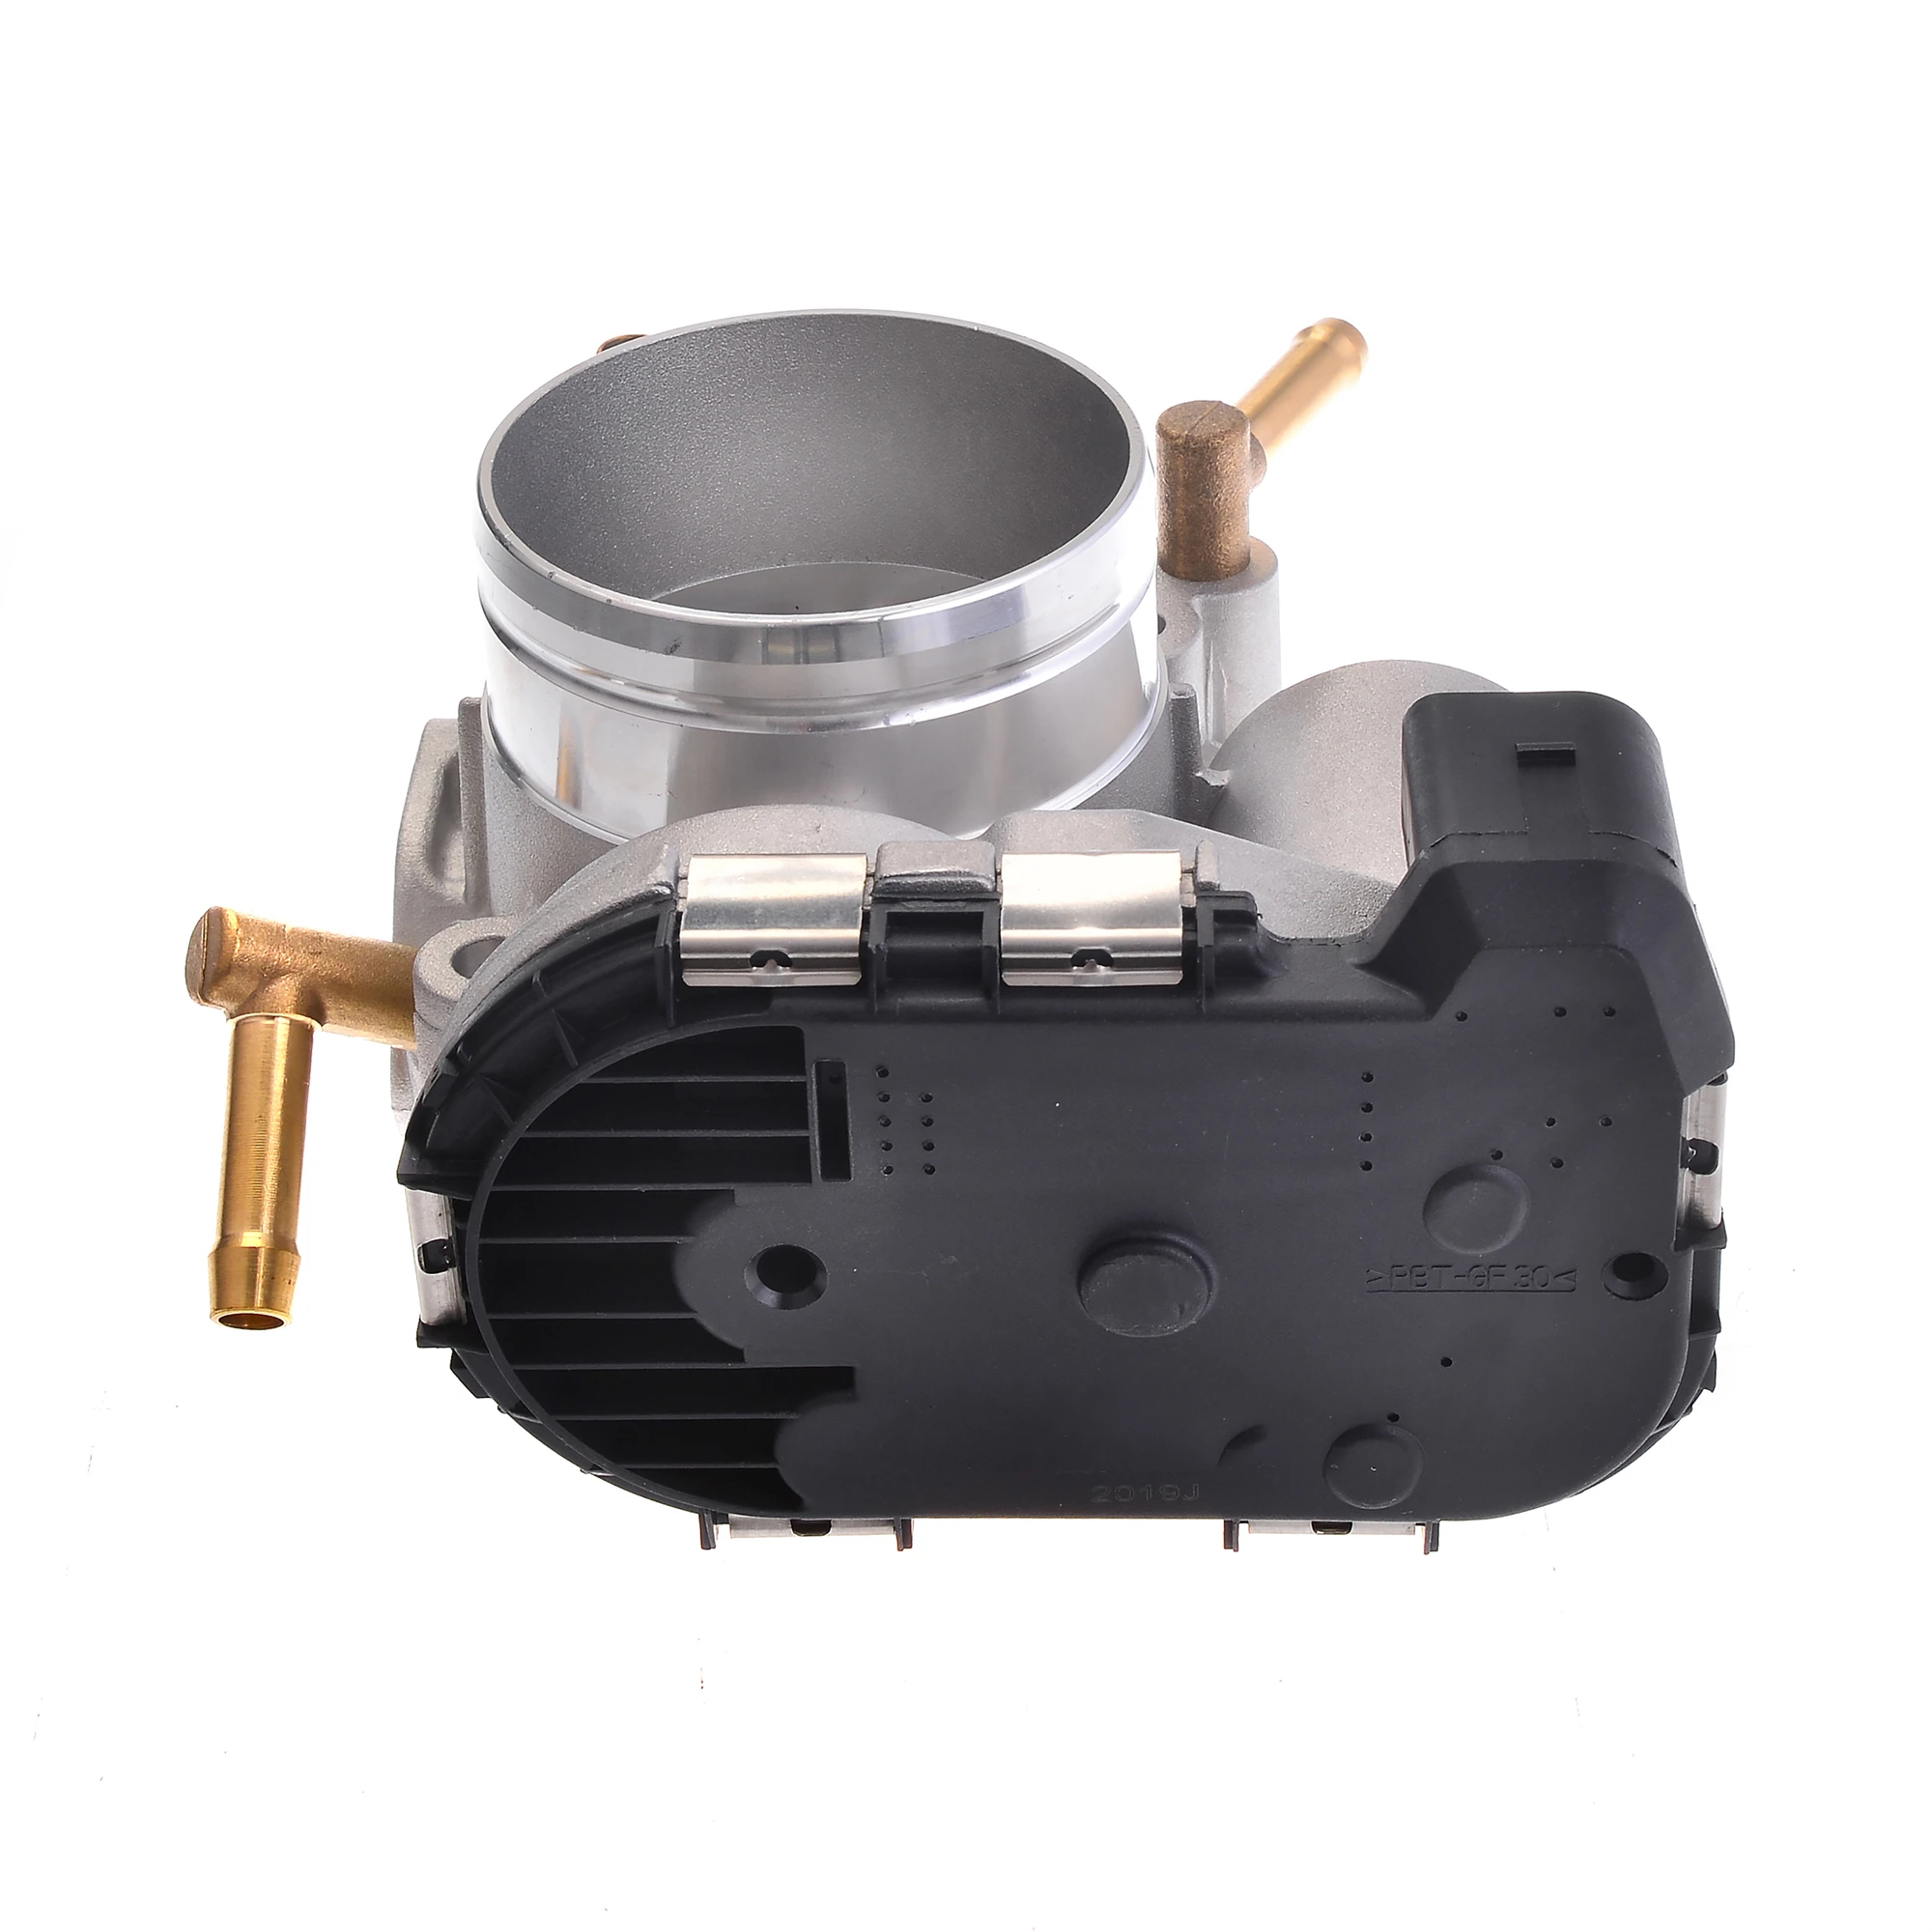 
06A133062D 06A133062Q 0280750061 Throttle Body Assembly For BEETLE 2001-2003 2.0L 